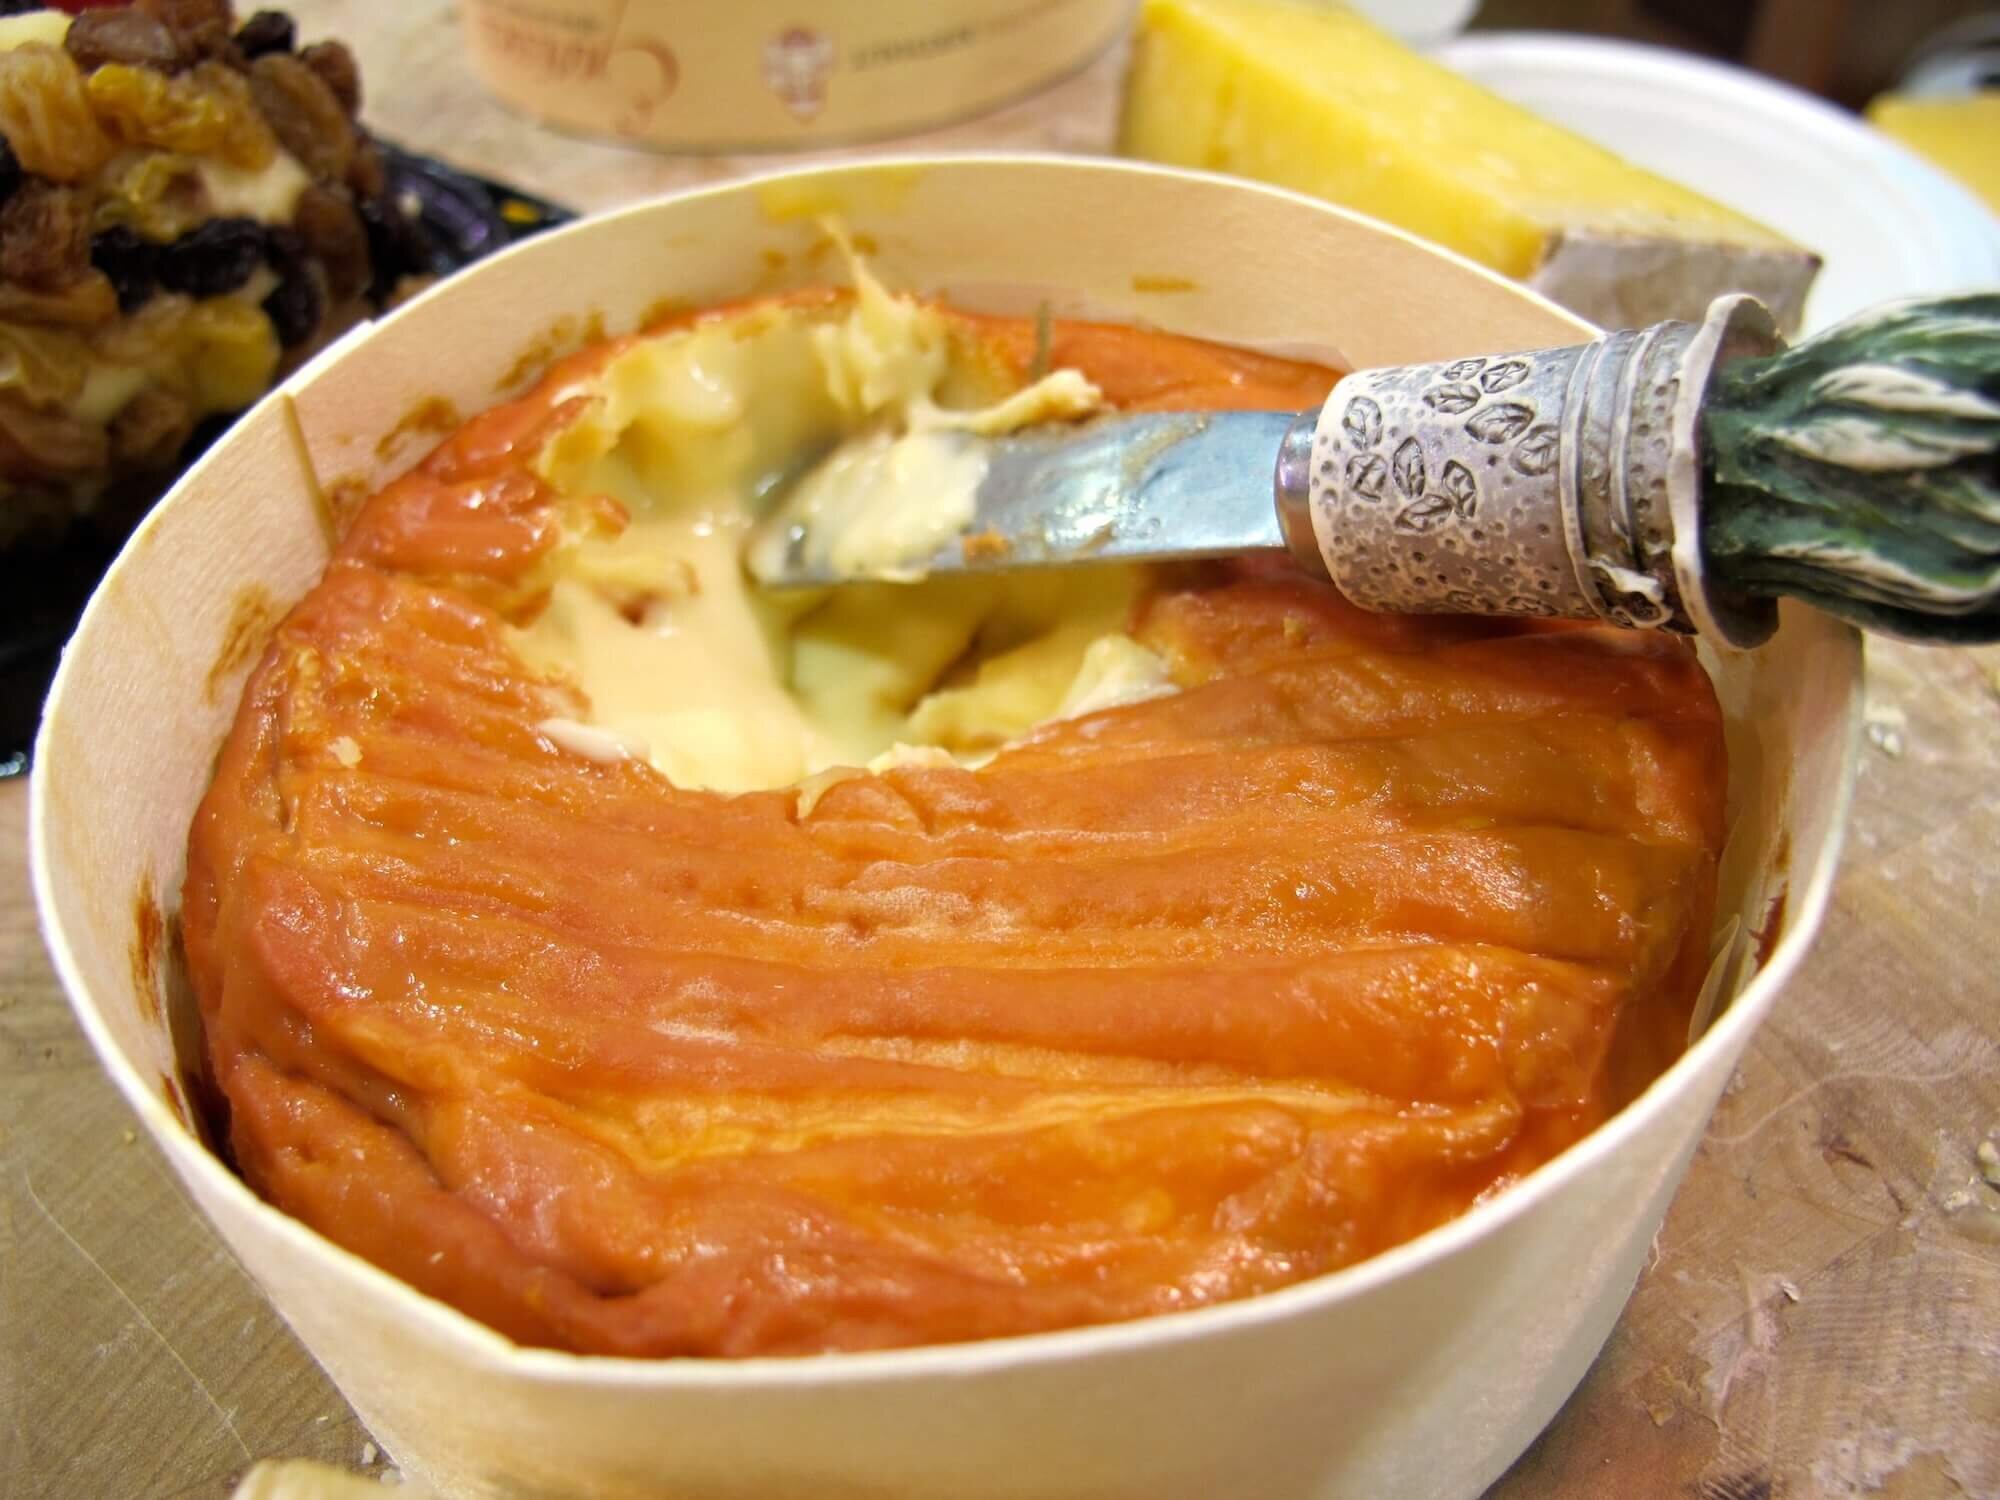 "Some SICK Epoisses at the Fresca Italia table" de the tablehopper tiene licencia bajo CC BY-NC-ND 2.0